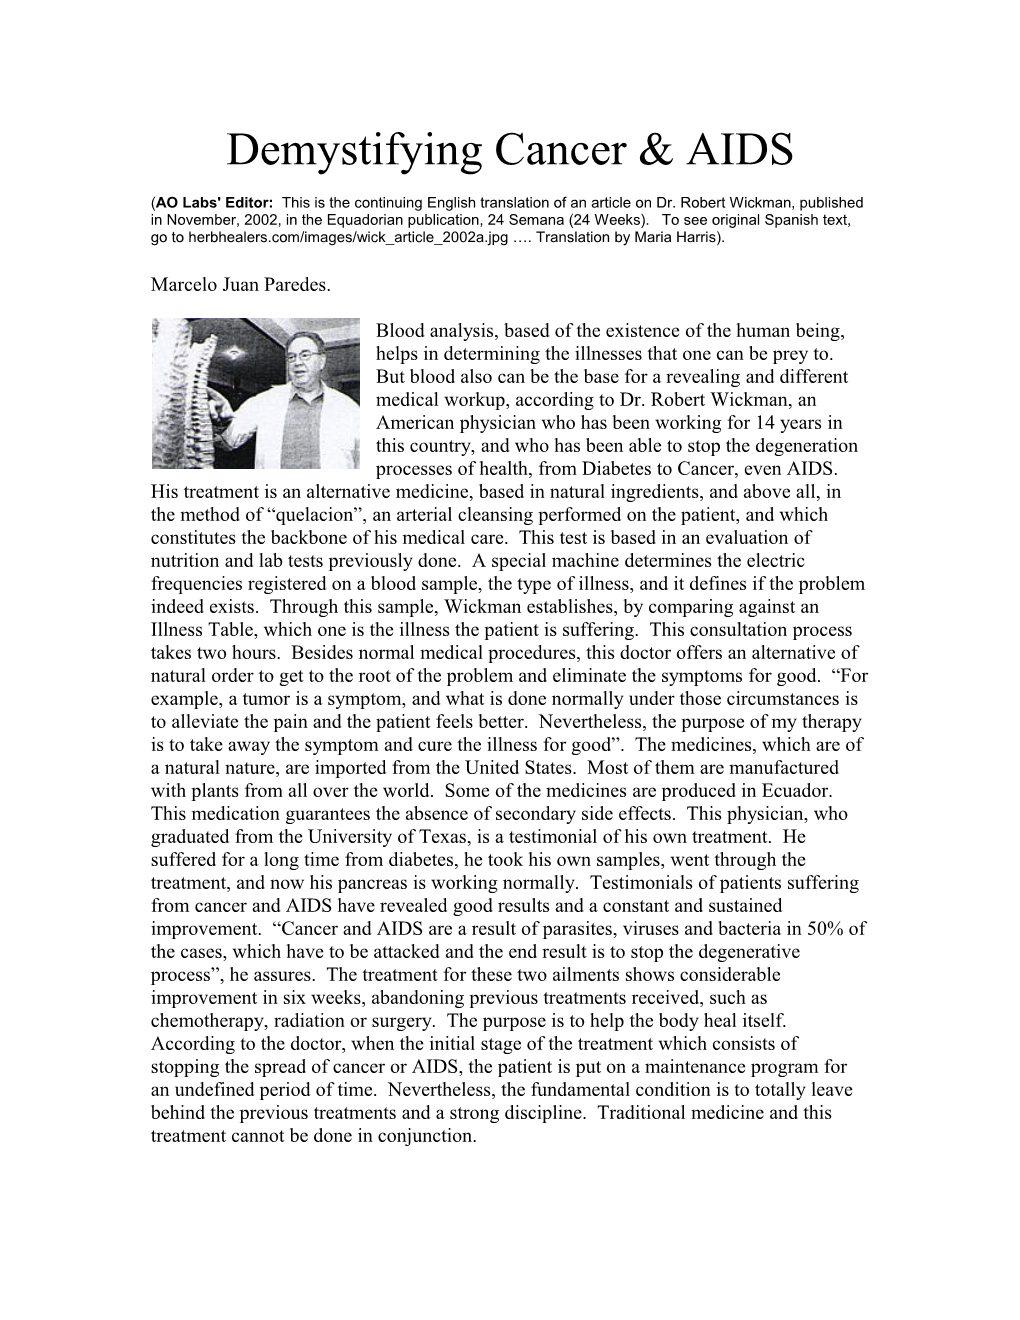 Demythifying Cancer and AIDS